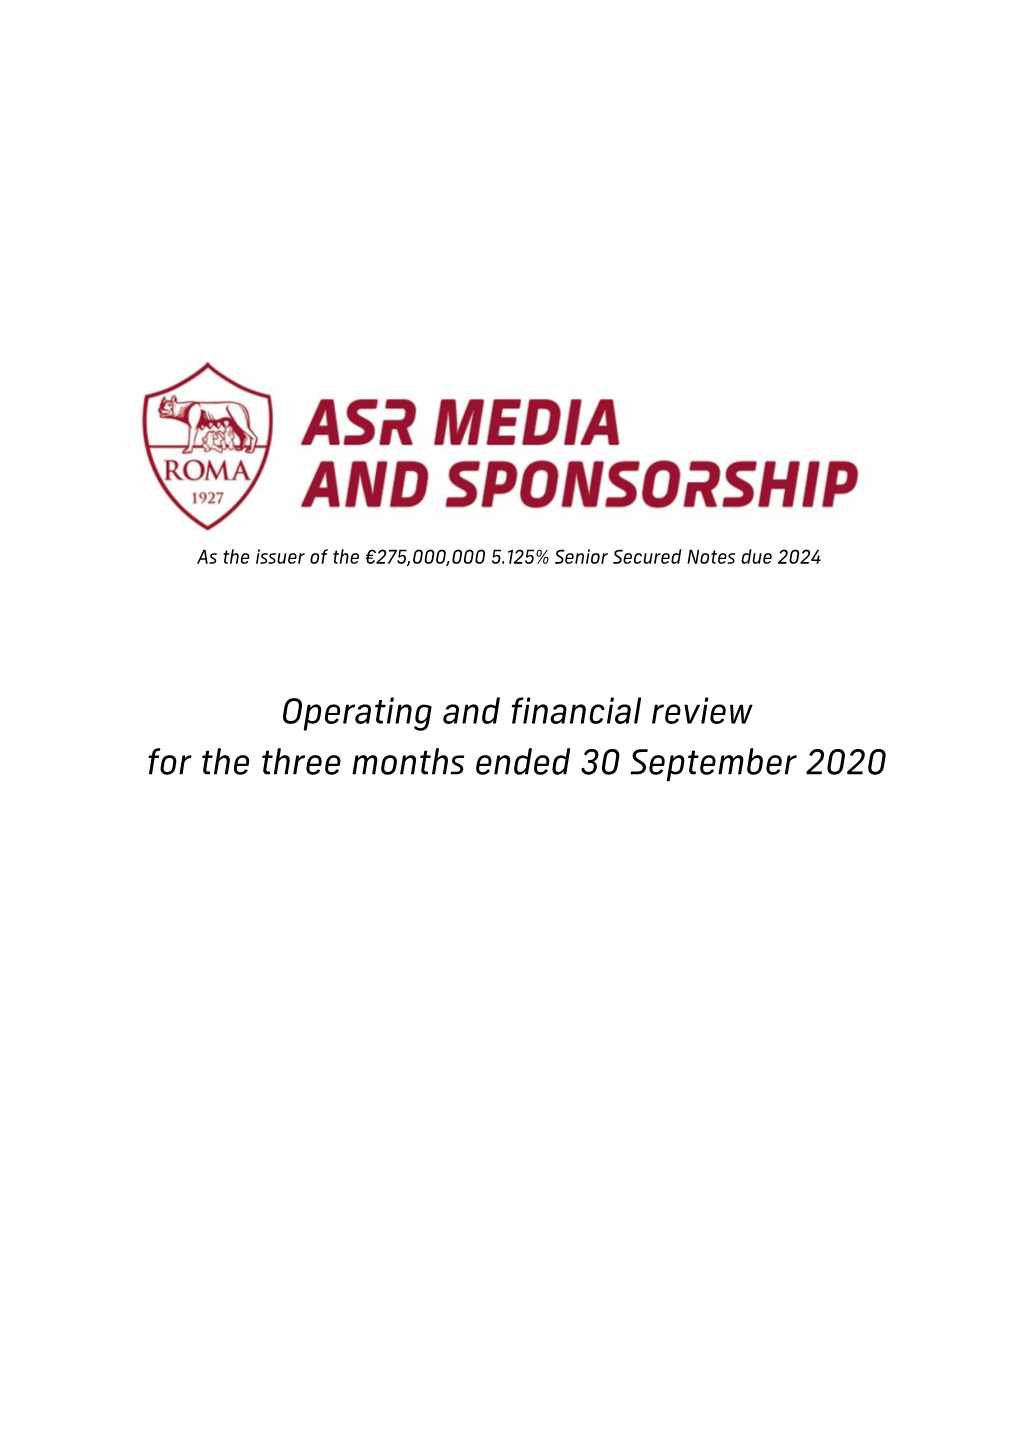 Operating and Financial Review for the Three Months Ended 30 September 2020